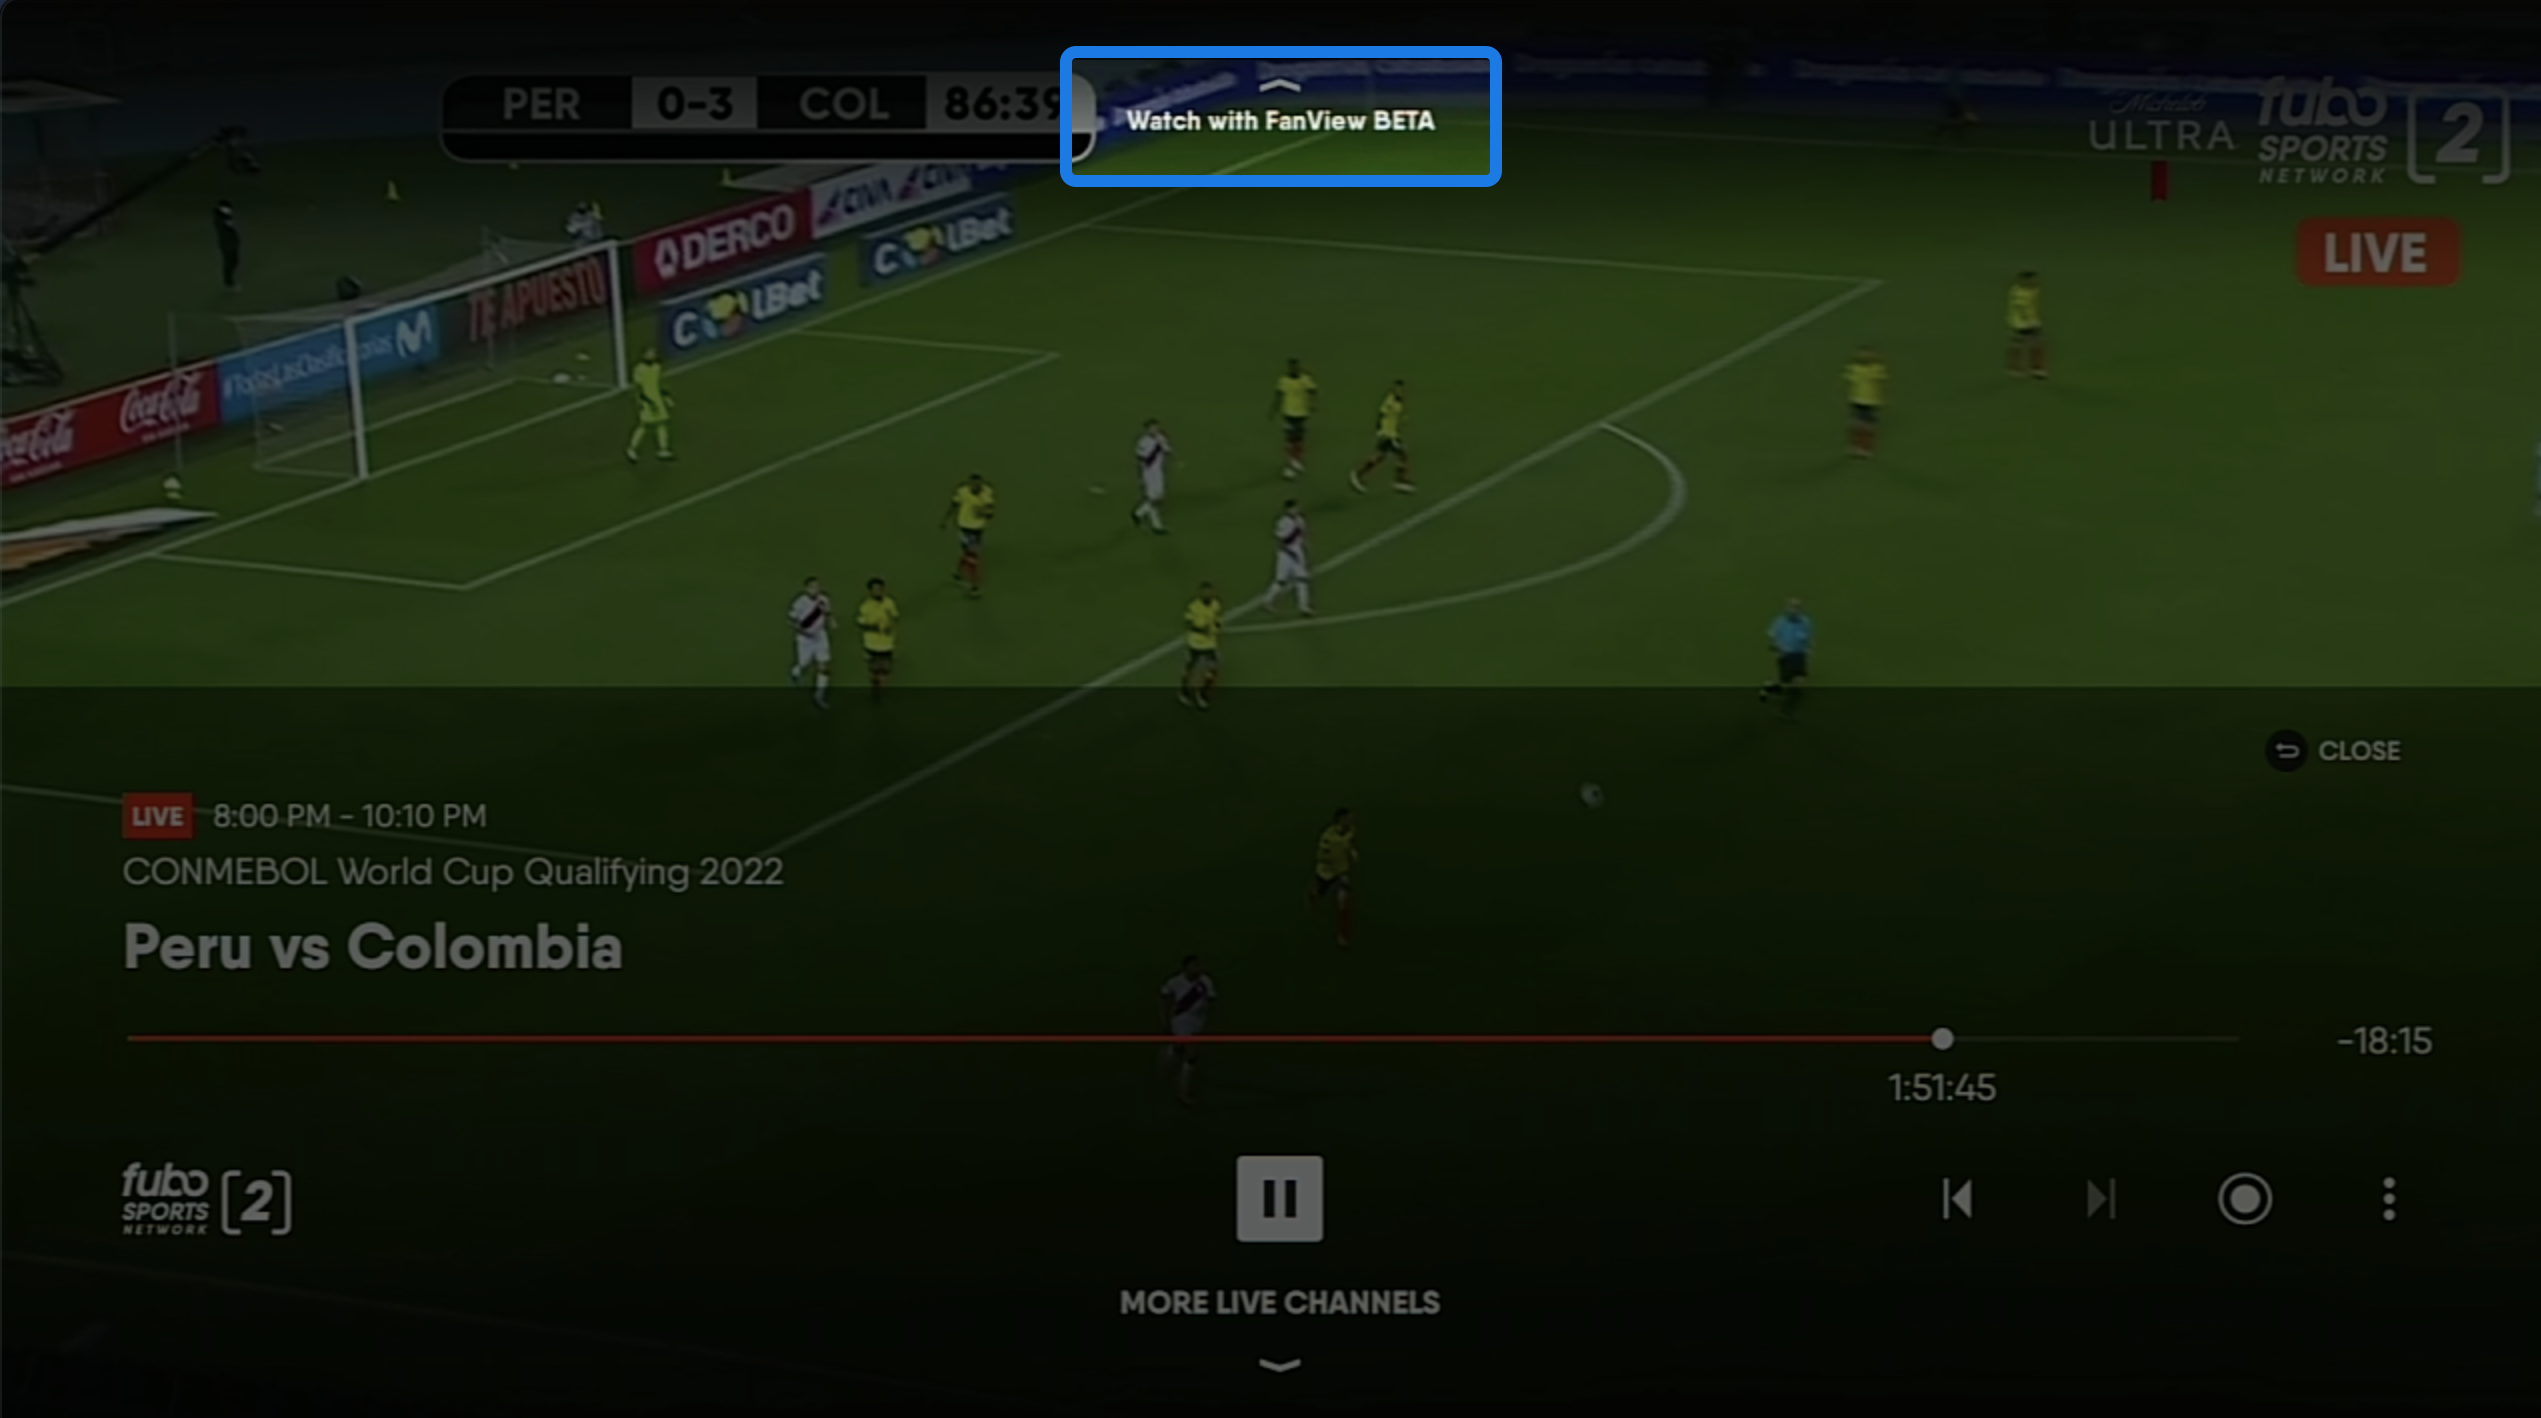 Live video on the FuboTV app for Amazon Fire TV with the FanView toggle showing; press up on the remote to enable FanView